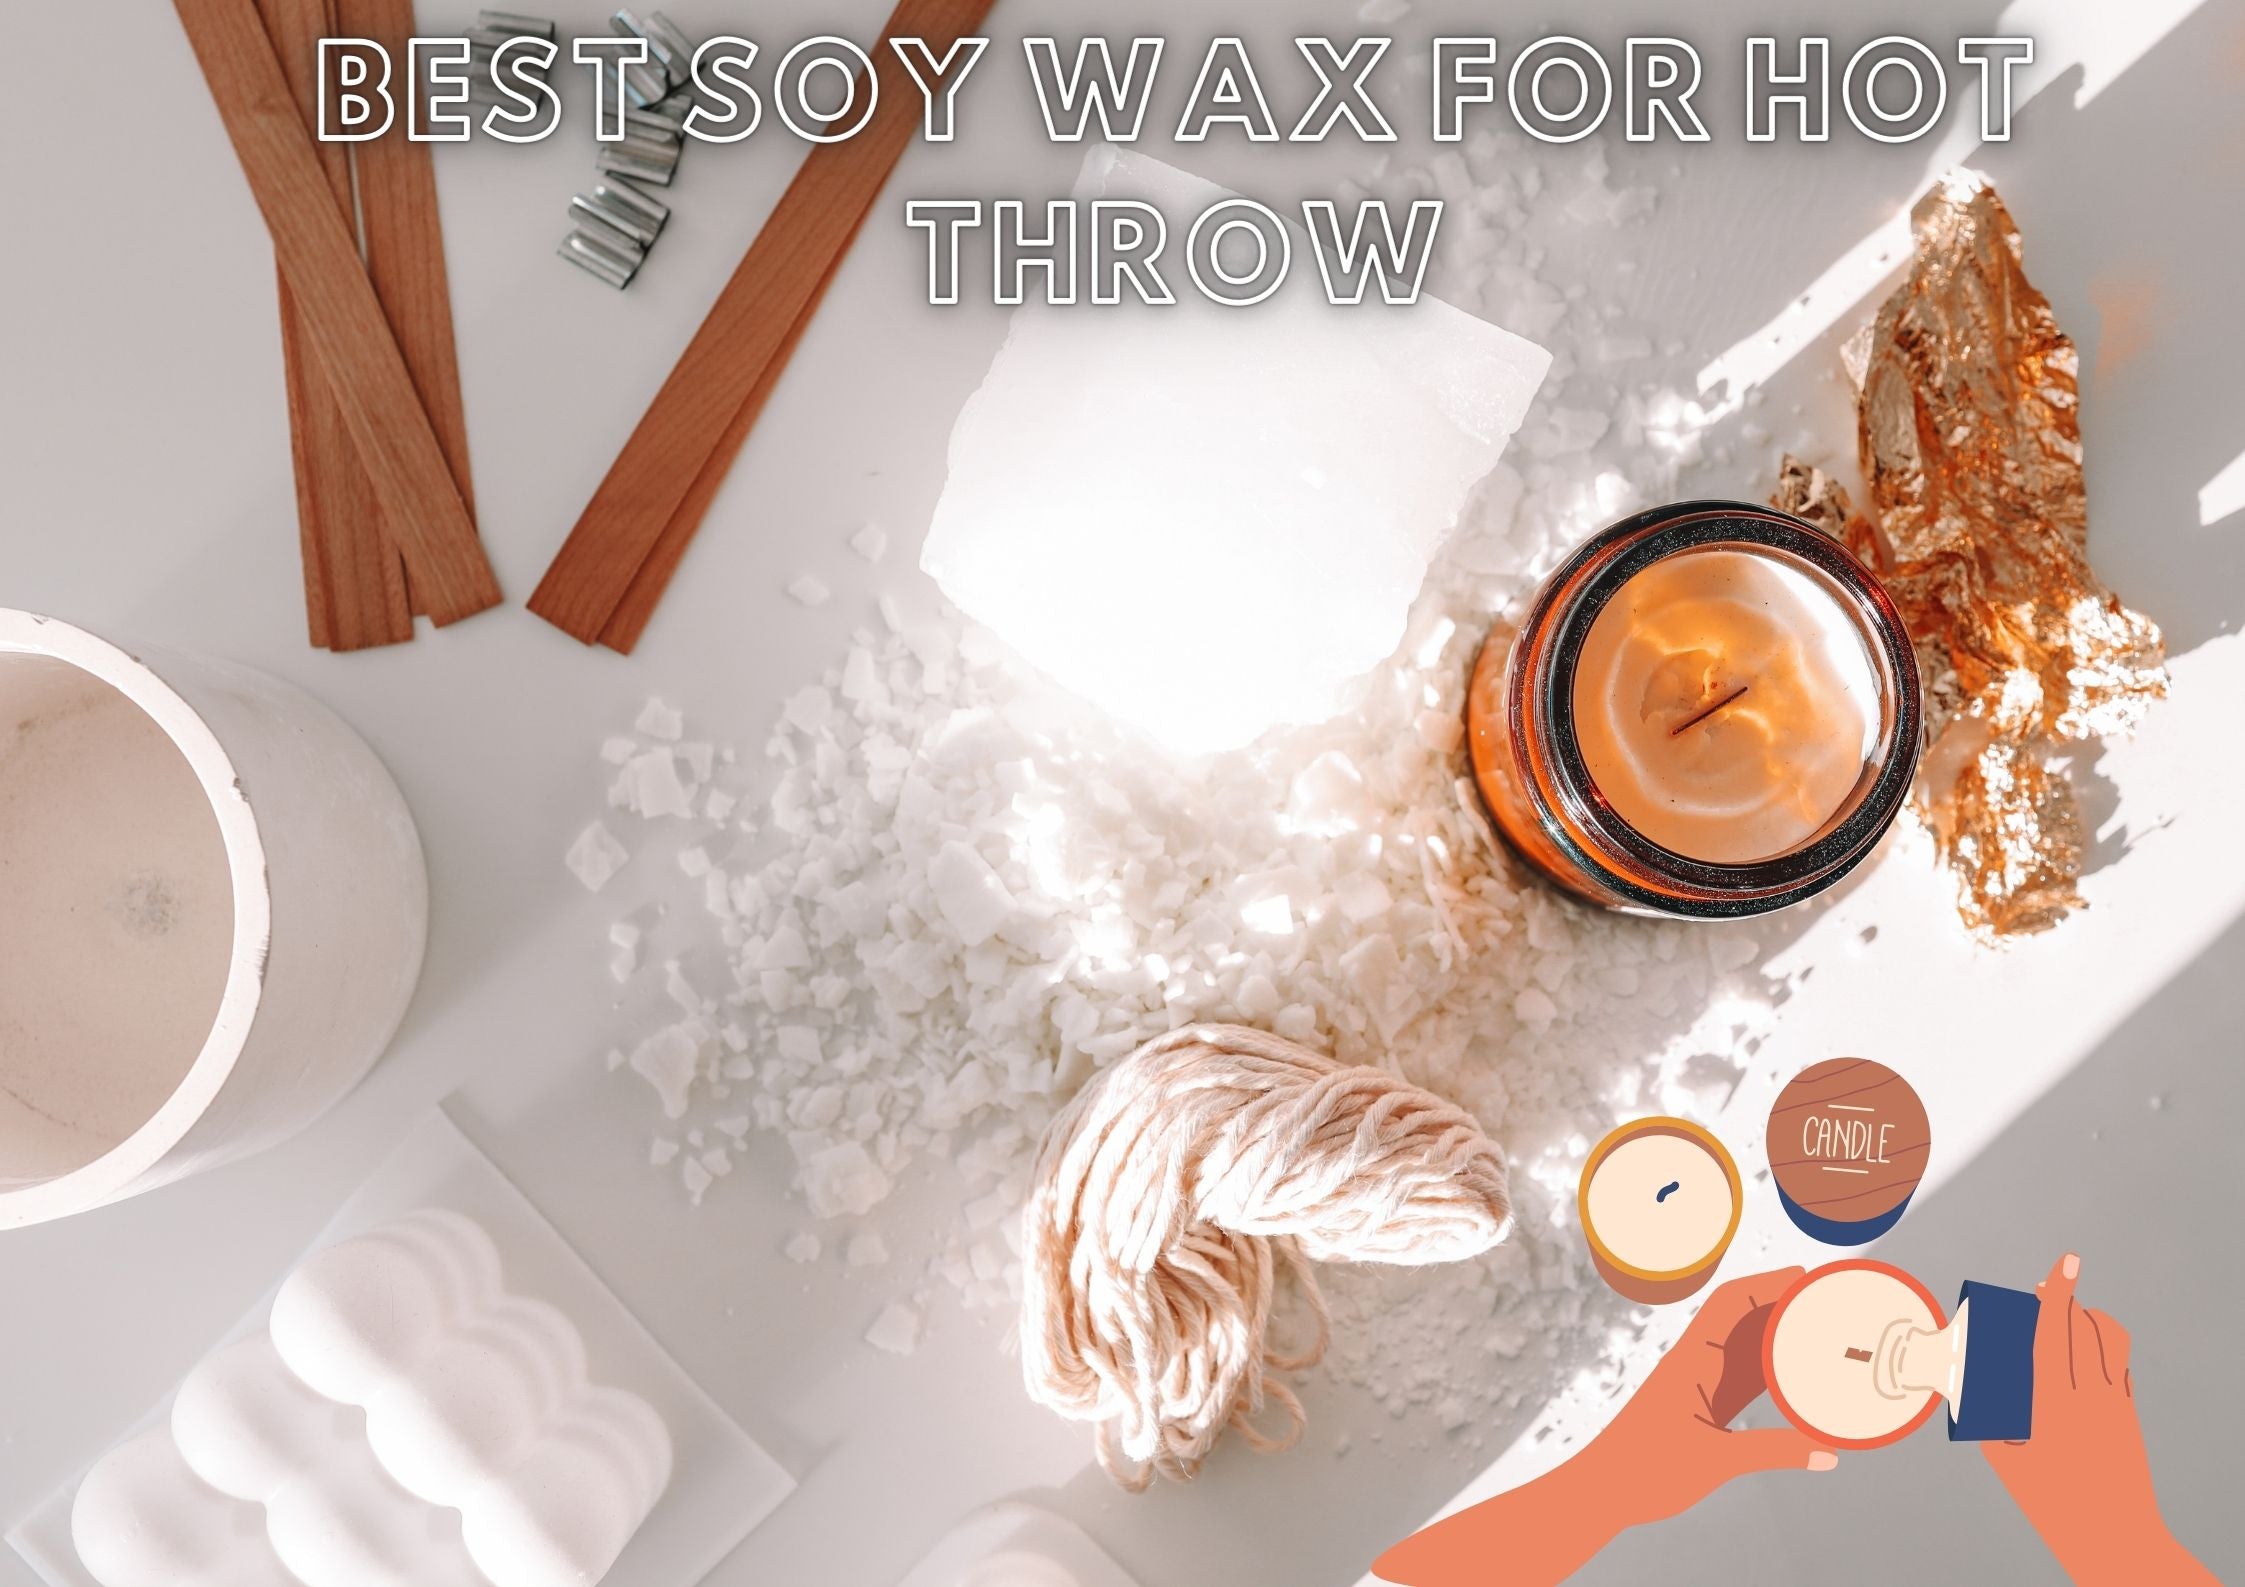 Best soy wax for hot throw